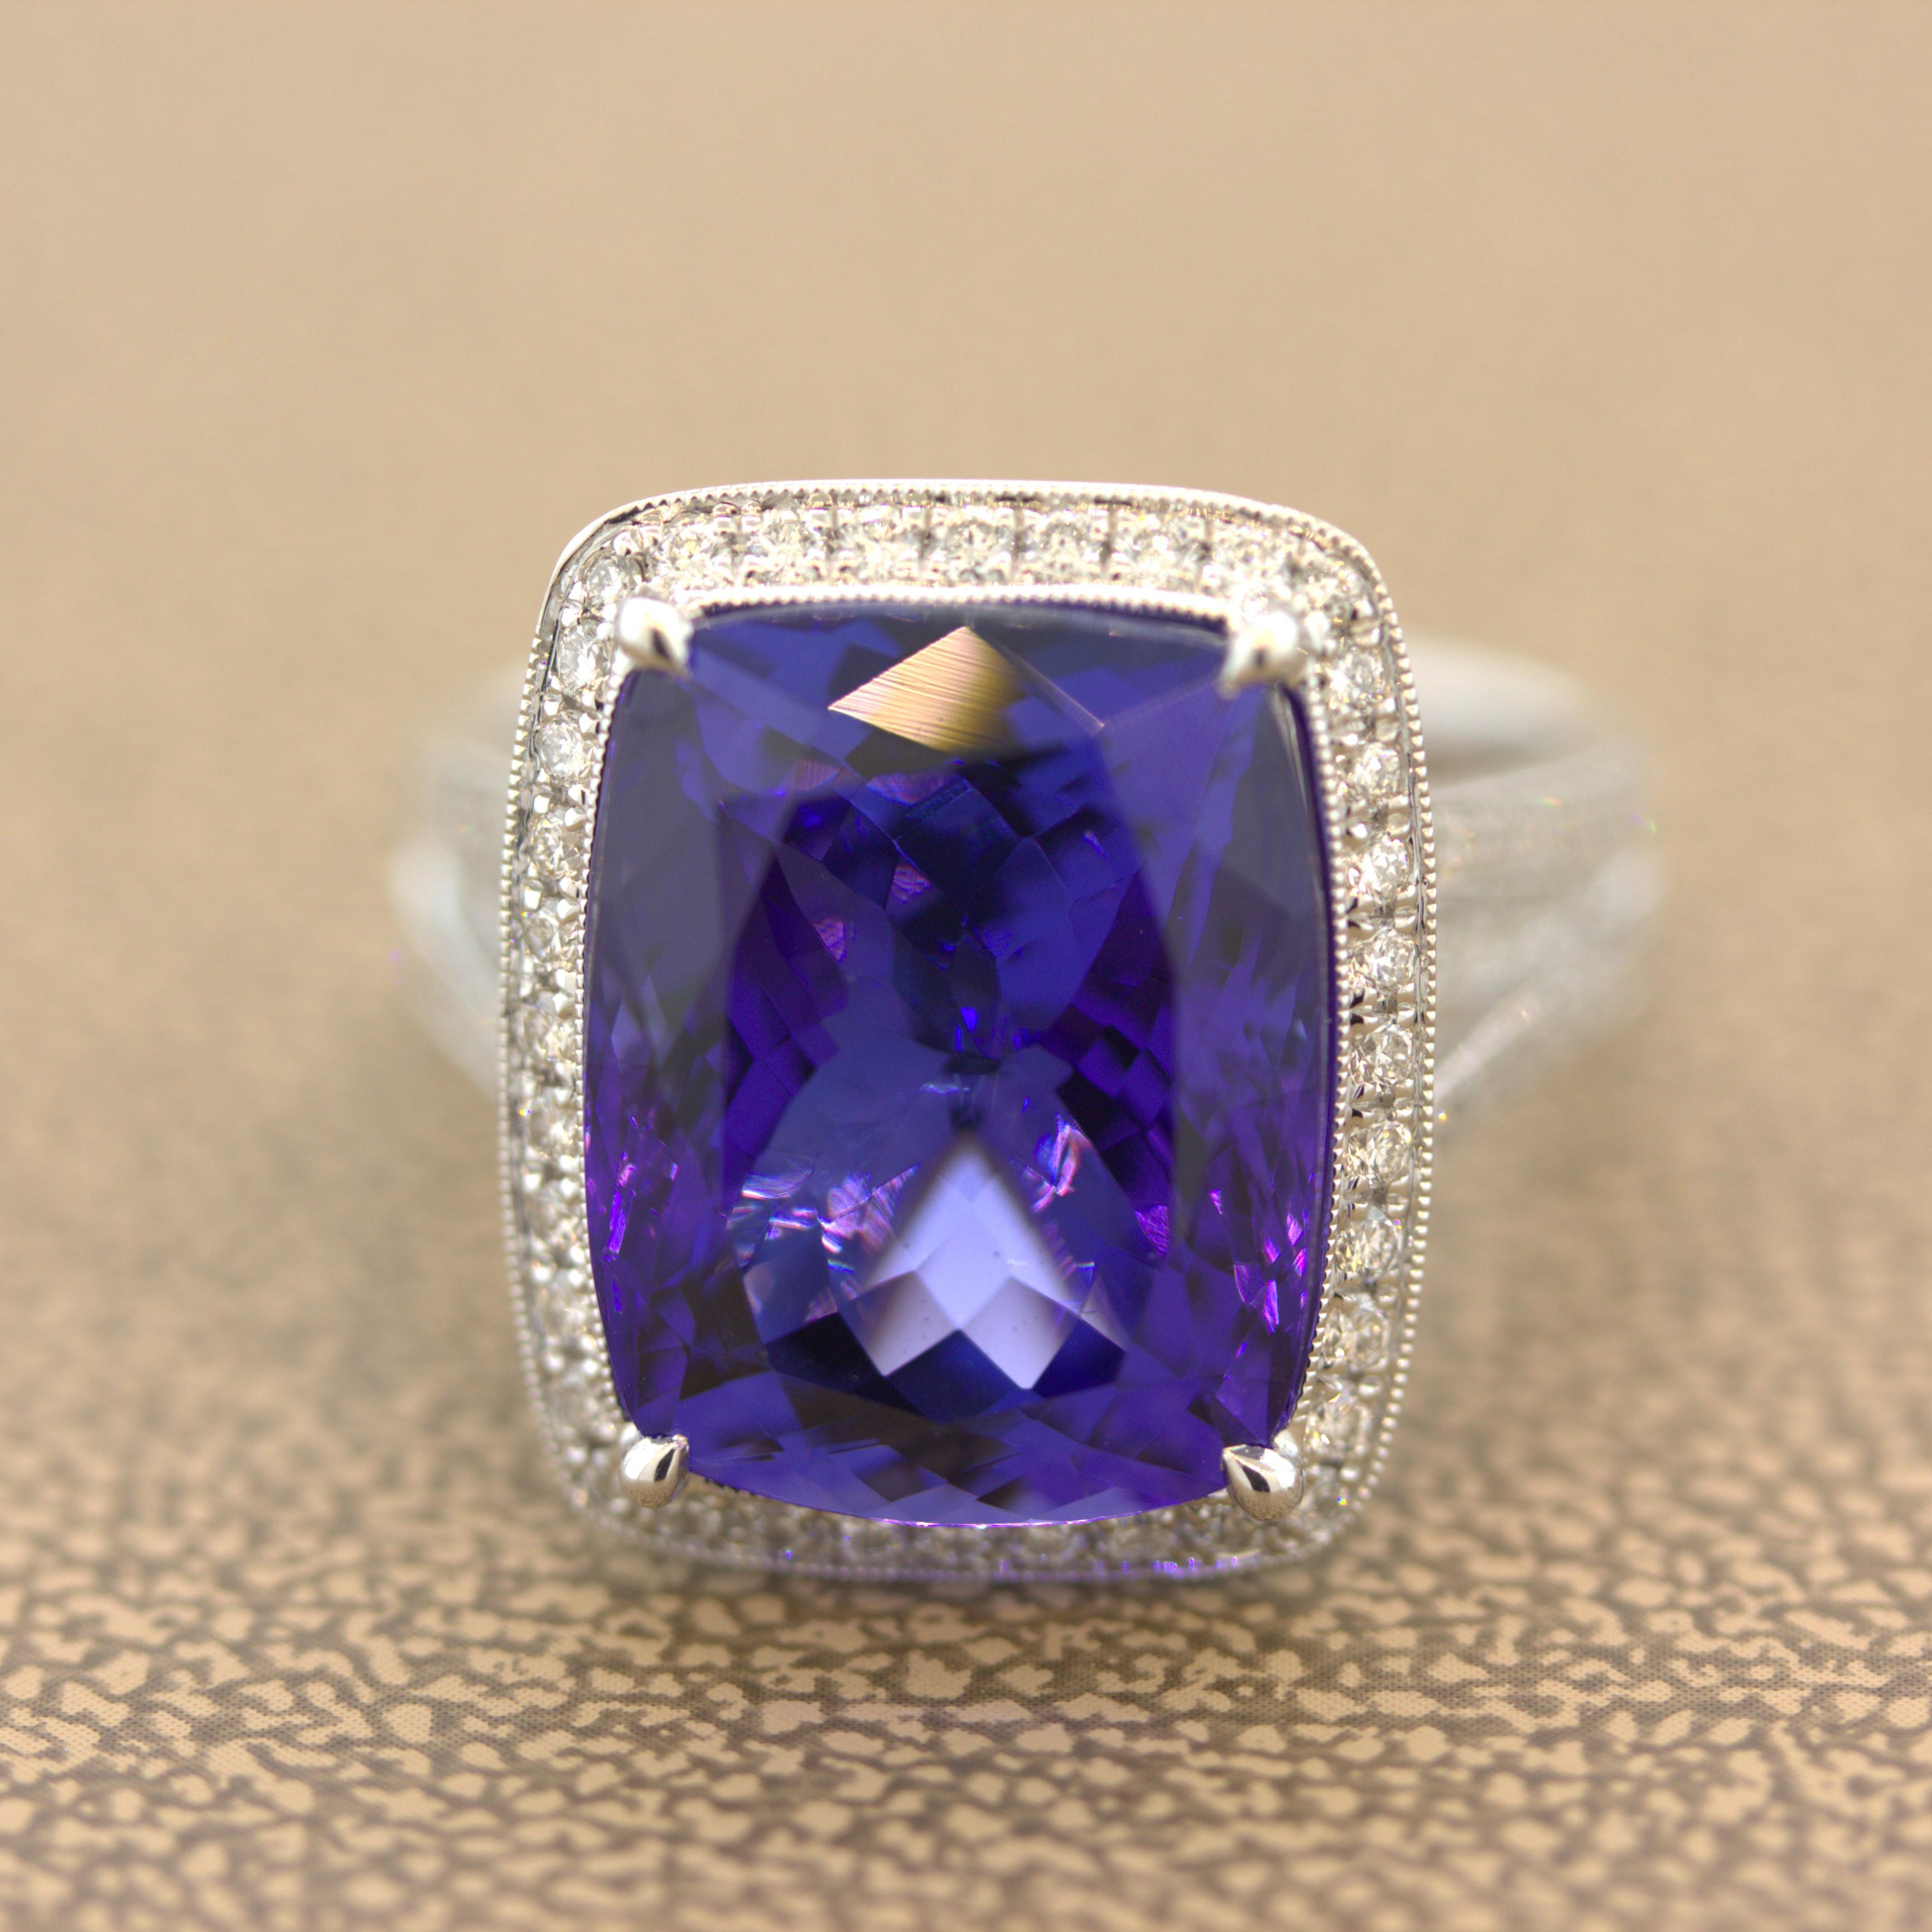 A sweet and savory tanzanite weighing 12.90 carats takes center stage. It has a rich and vibrant purple-blue color and is completely clean with no visible inclusions allowing the stones natural brilliance to shine. It is accented by 0.75 carats of